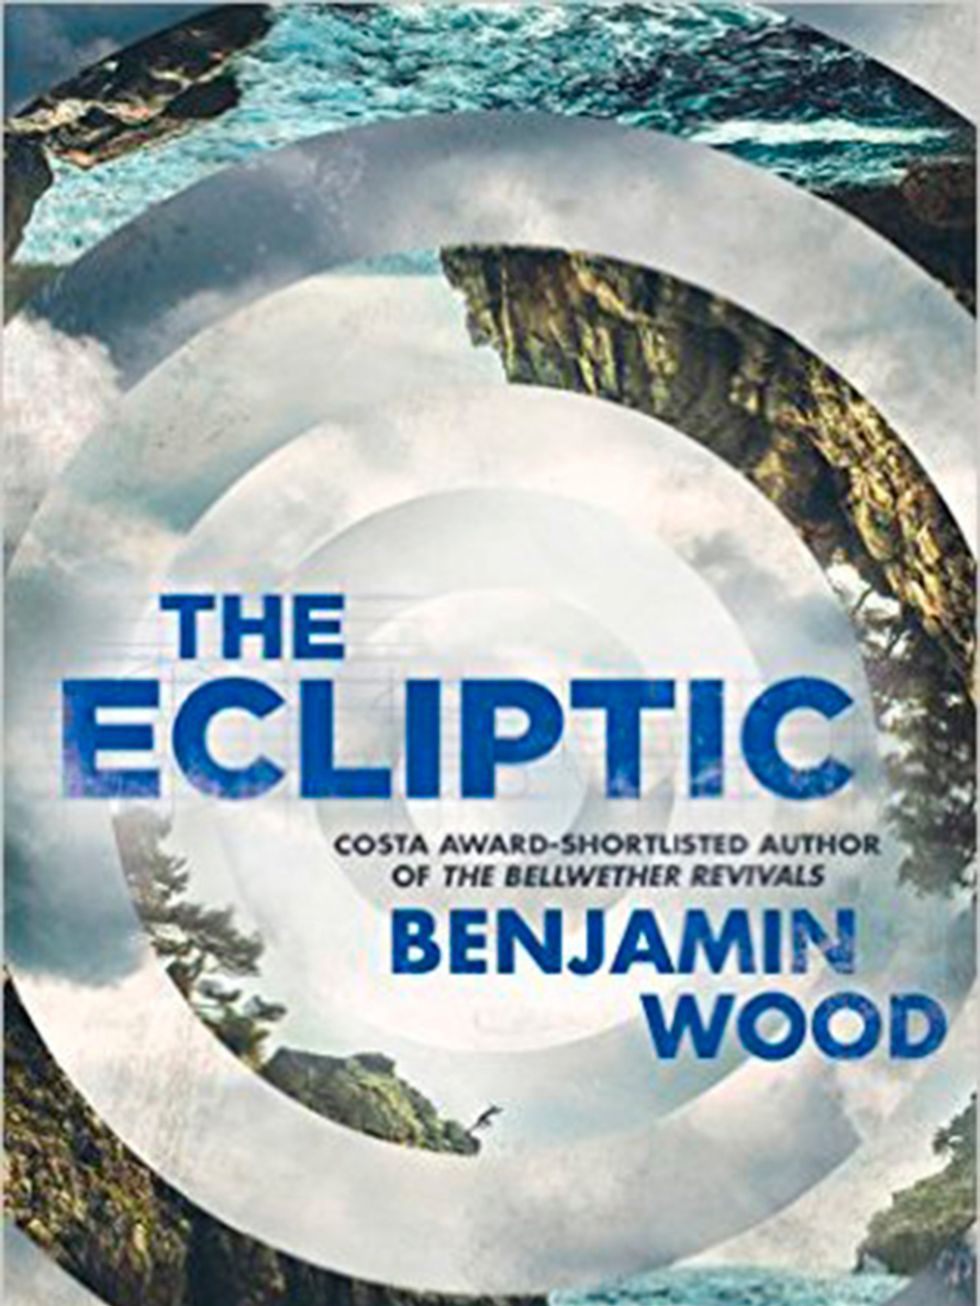 <p><strong>2. The Ecliptic by Benjamin Wood (Scribner)</strong></p>

<p>One of the most underrated novels of the year; Wood manages that elusive balance of writing exquisitely while also having a proper good old-fashioned plot complete with twists and tur